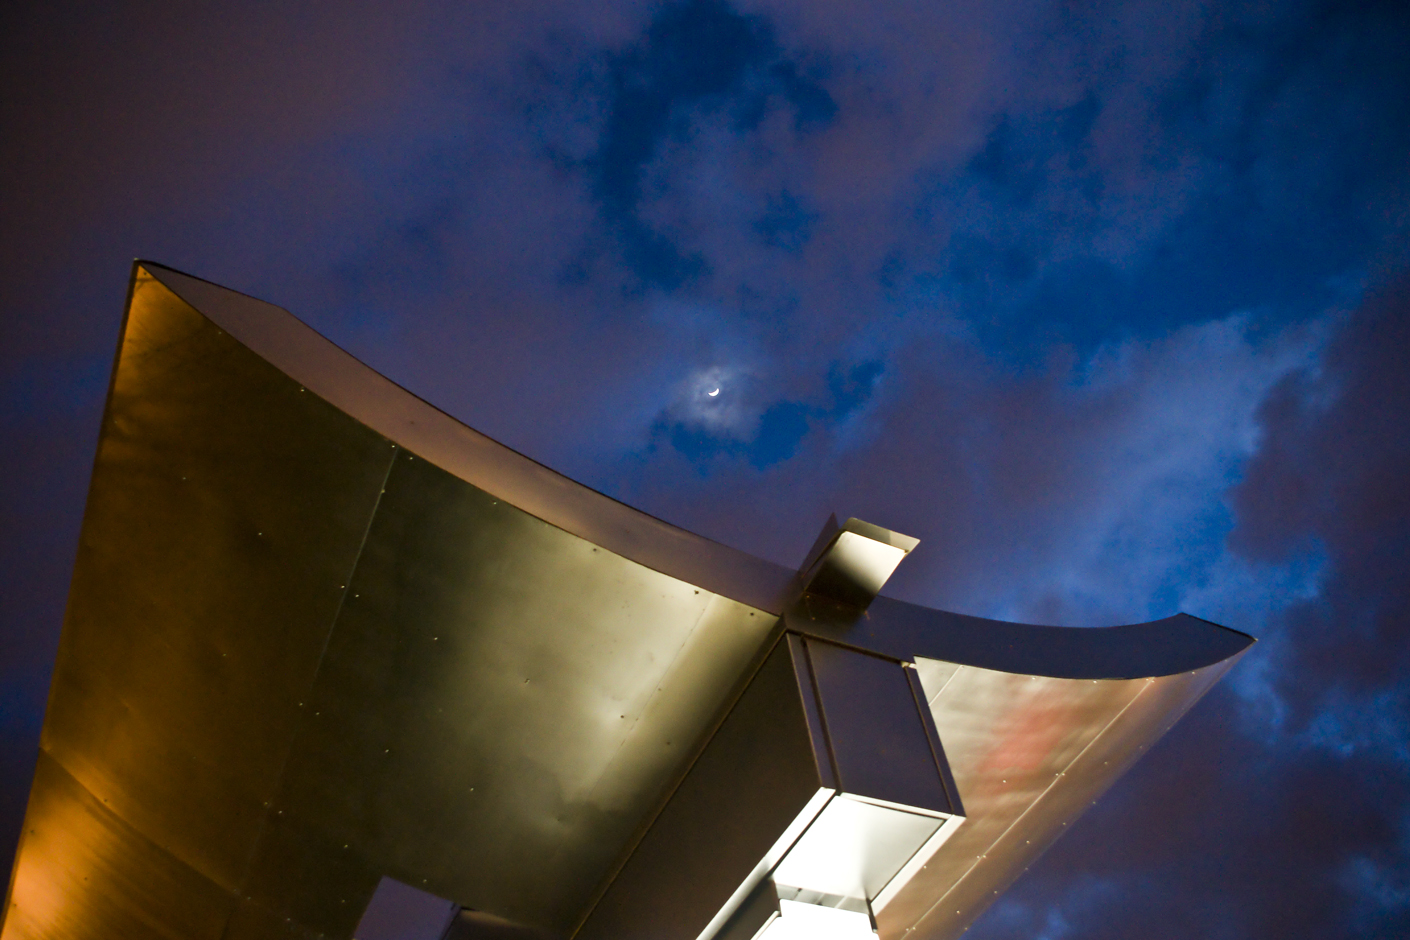 Bus stop structure with clouds and moon